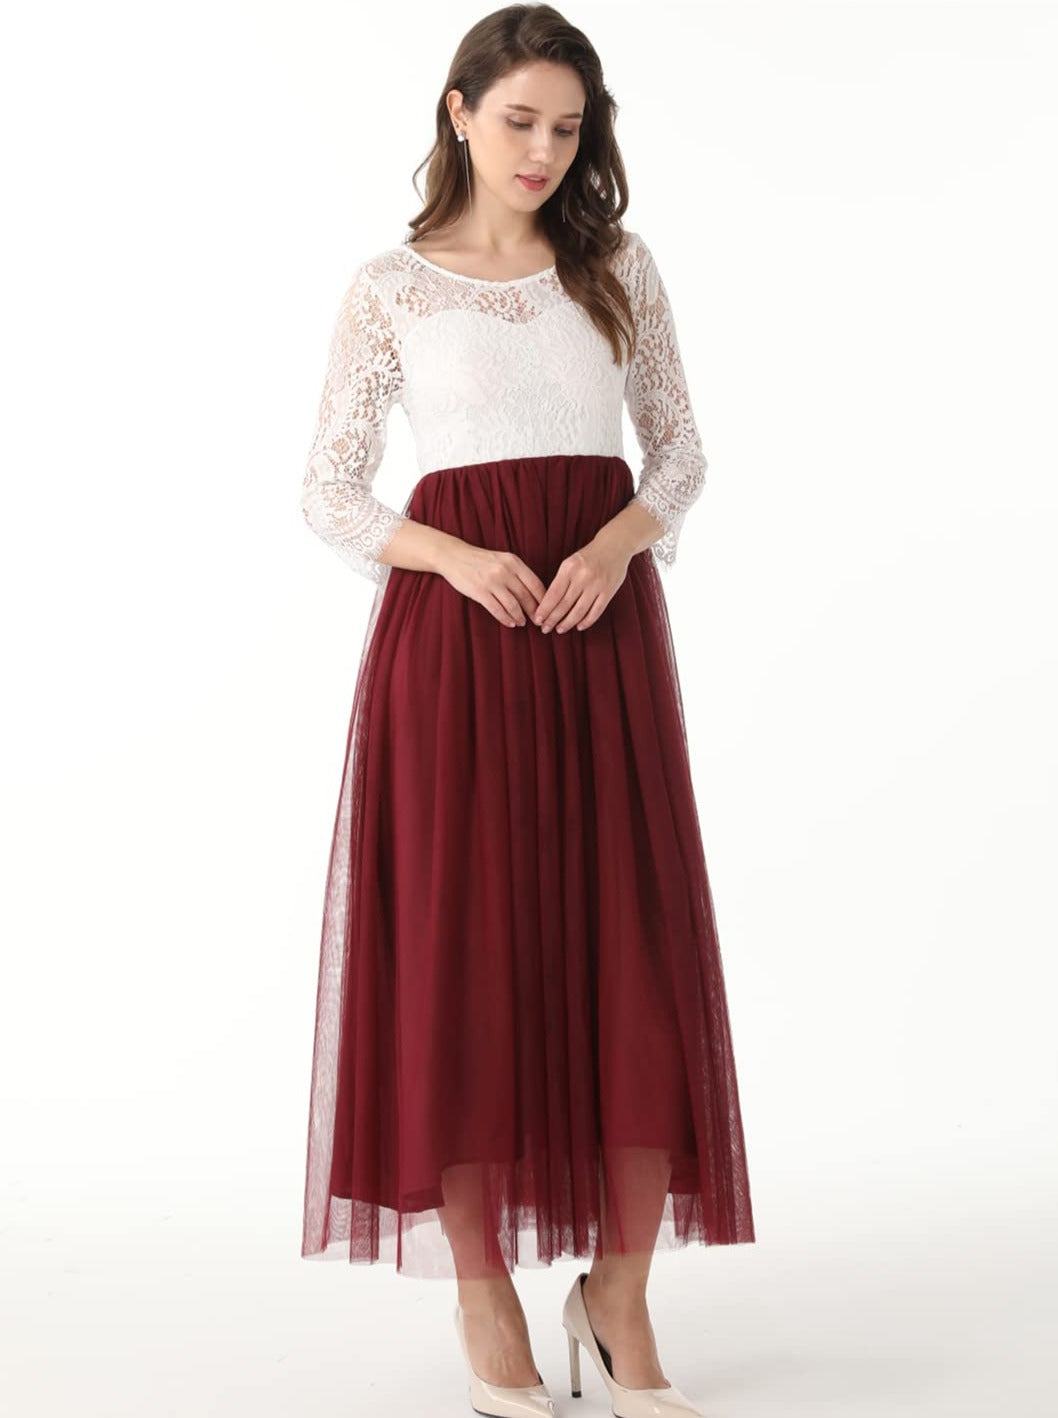 Peony Lace Dress for Women in Burgundy